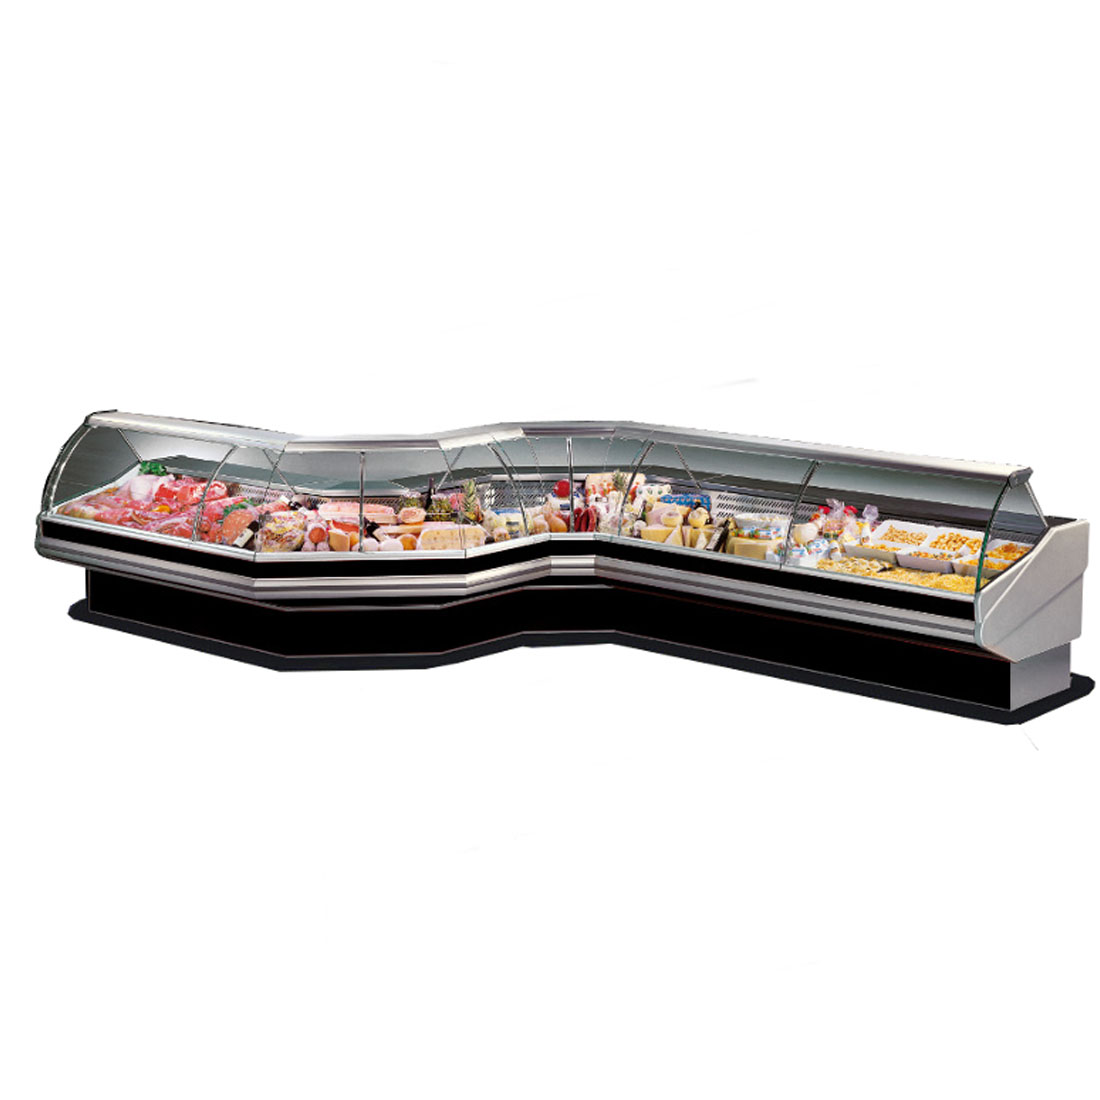 PAN1500 - Curved front glass deli display